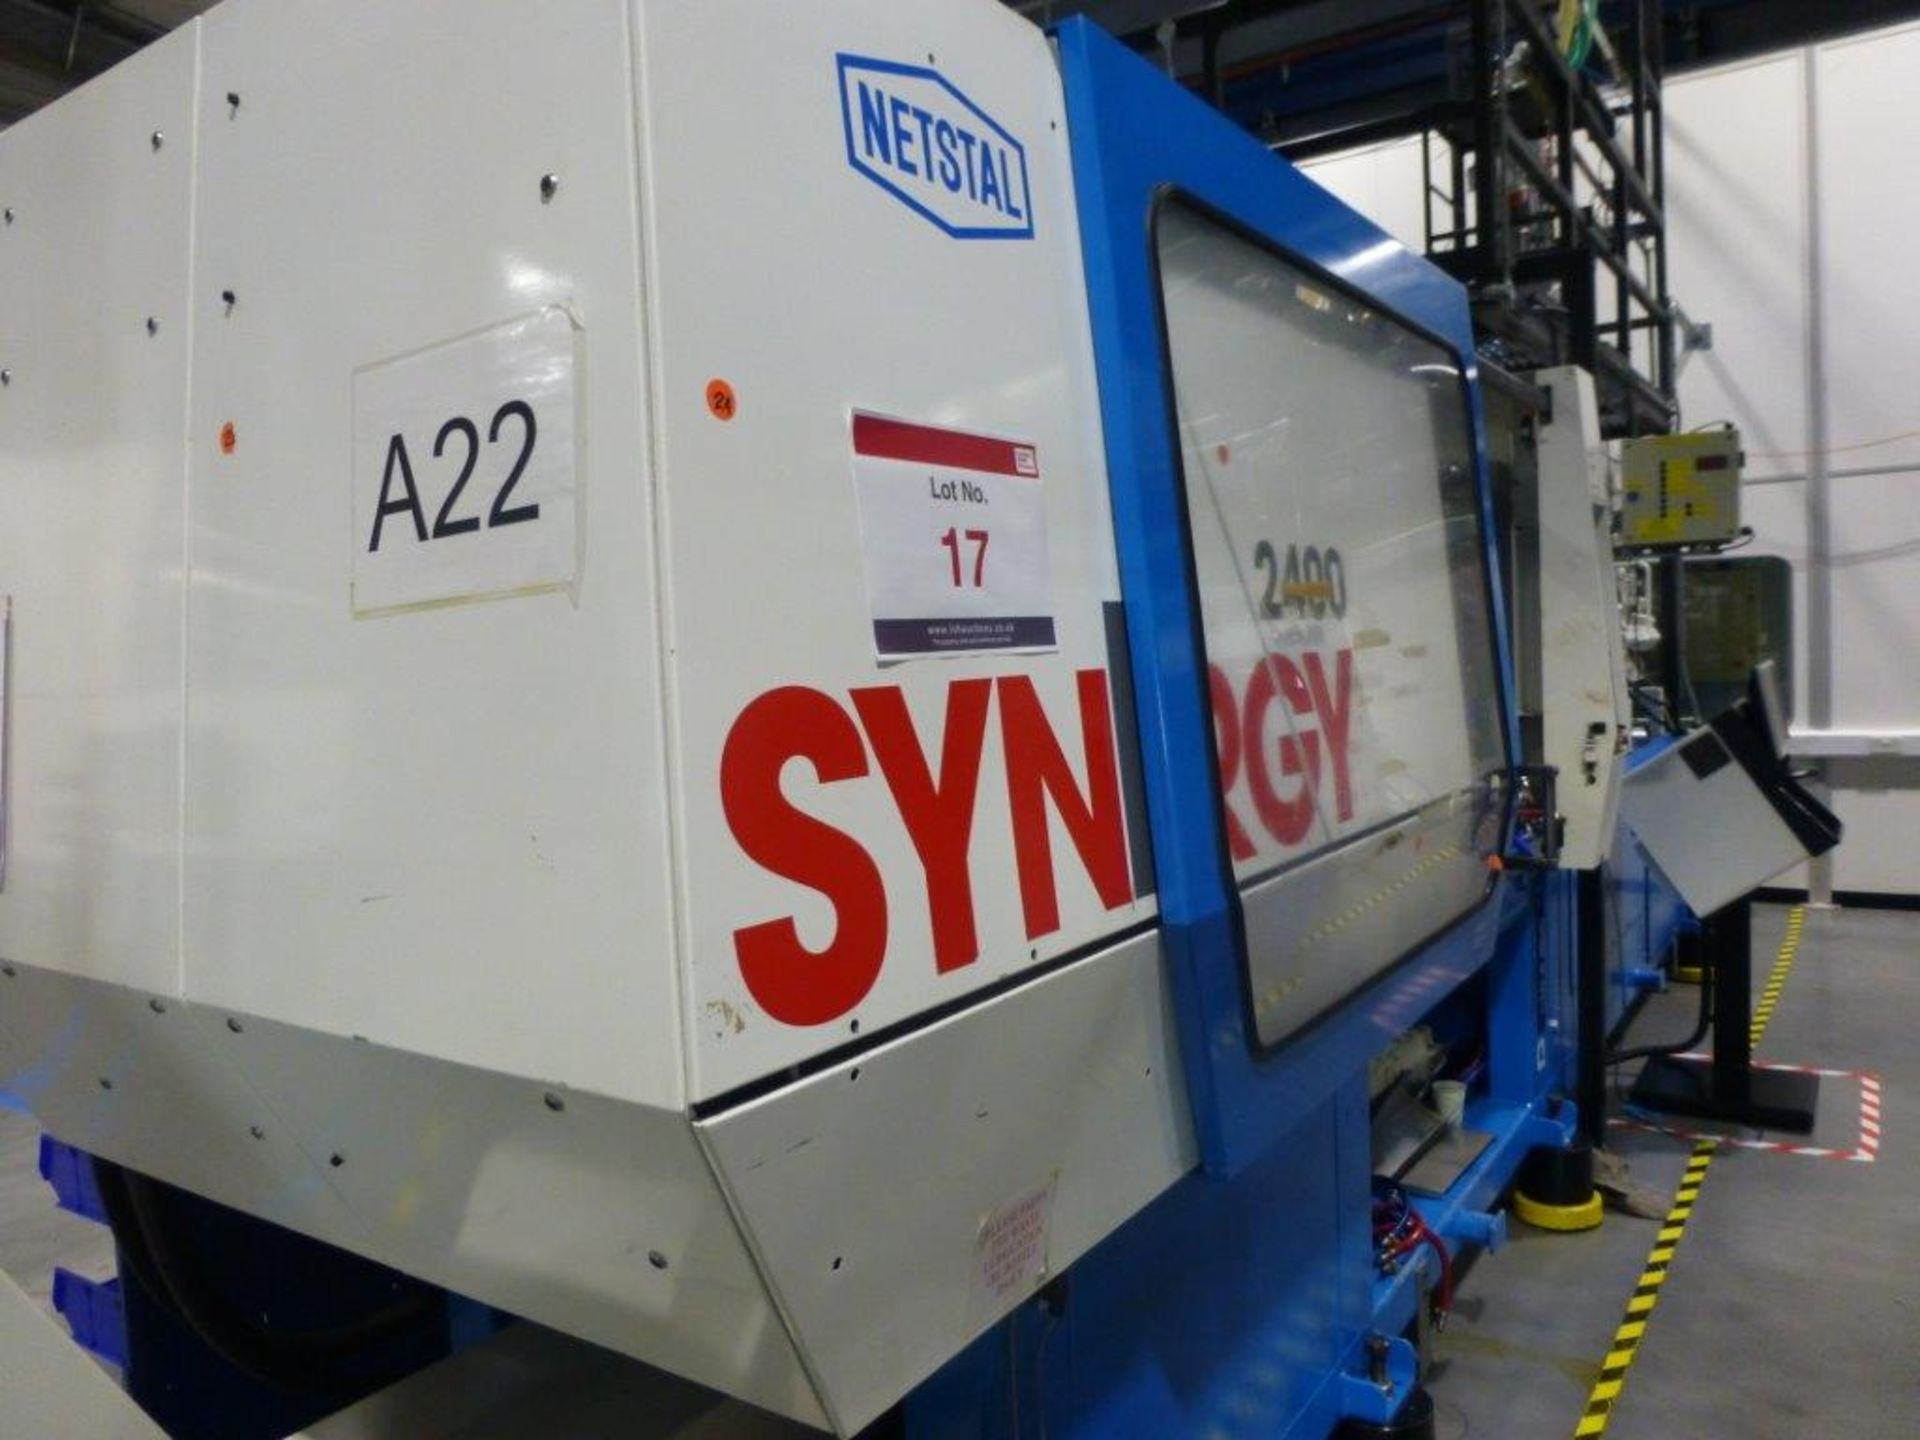 Netstal Synergy S-2400-2150 CNC Plastic Injection Moulding Machine Serial No. 9N.2004053601 (2004)